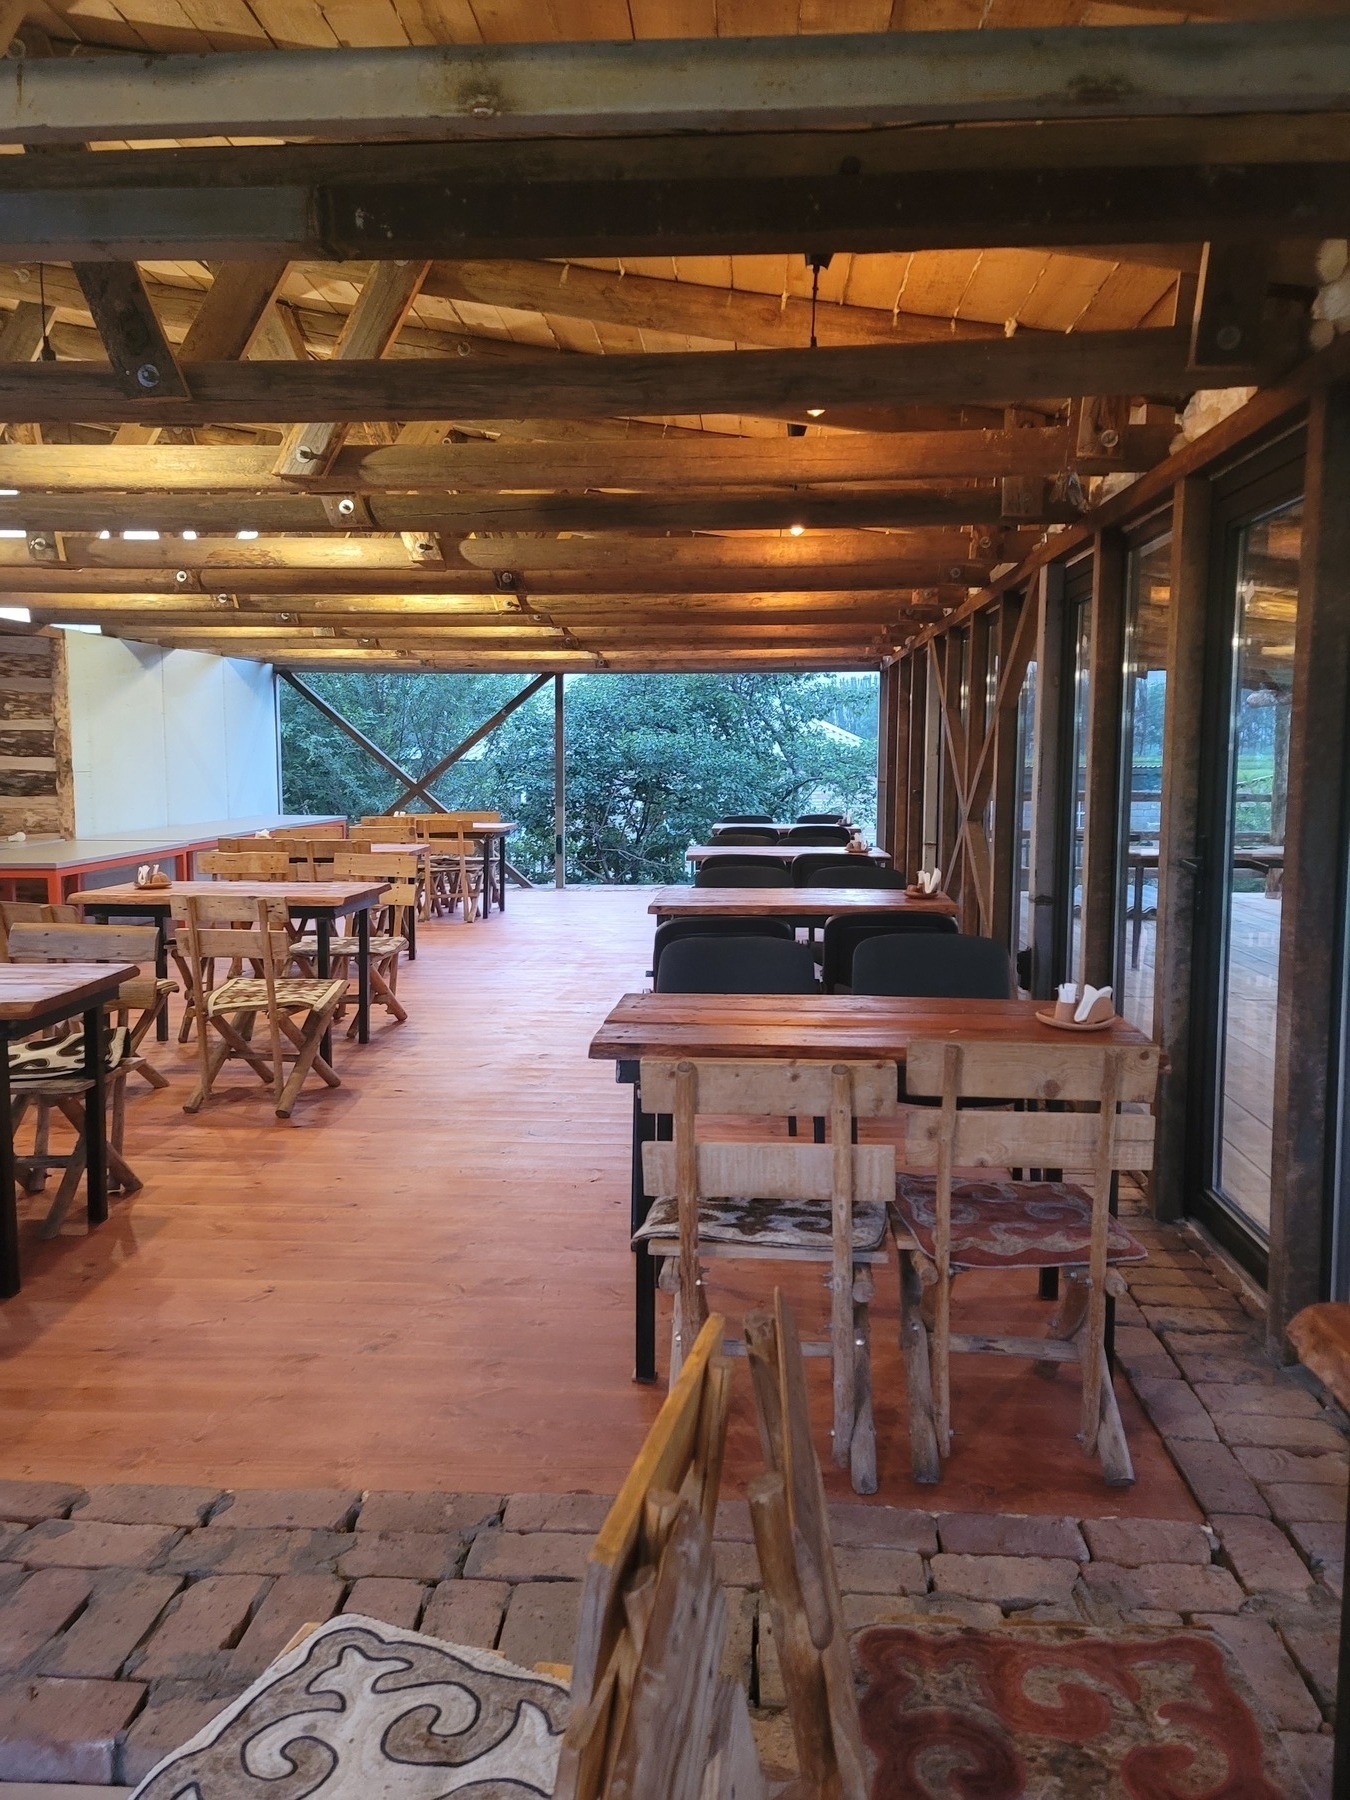 open-air deck area with wooden floor and roof and two rows of mostly wooden tables and chairs